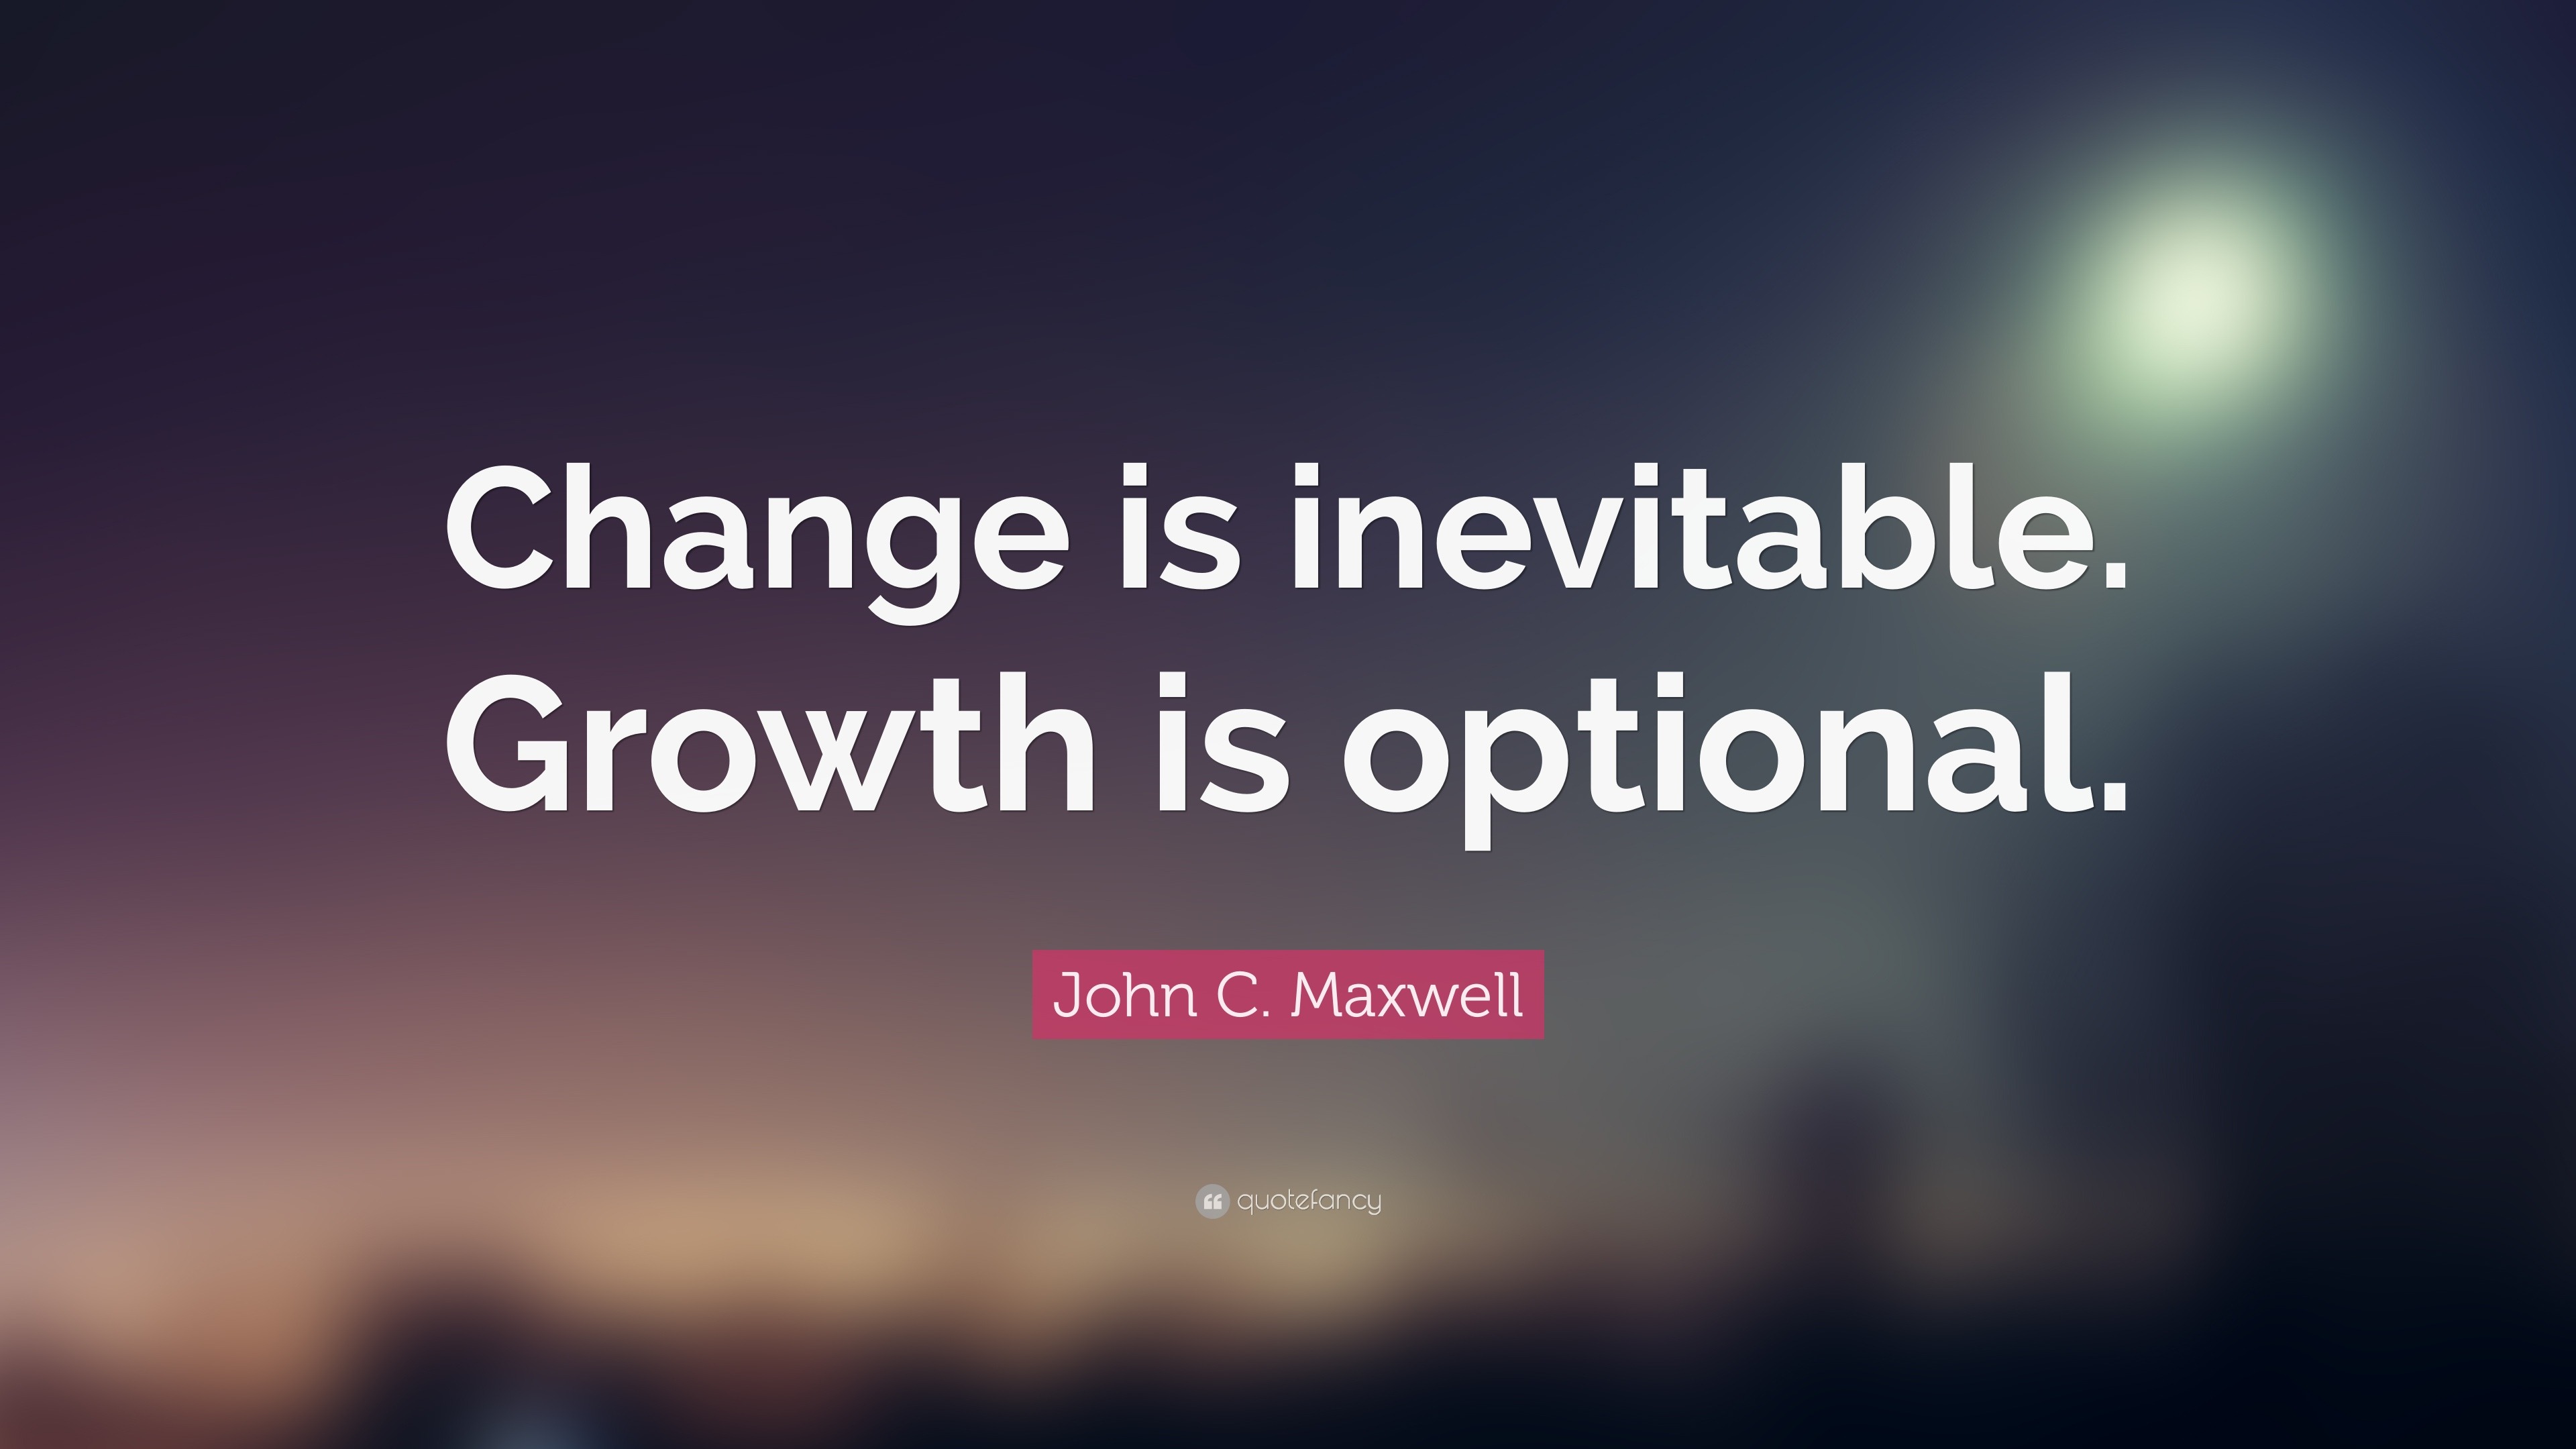 Business quotes about change and growth - pondxaser